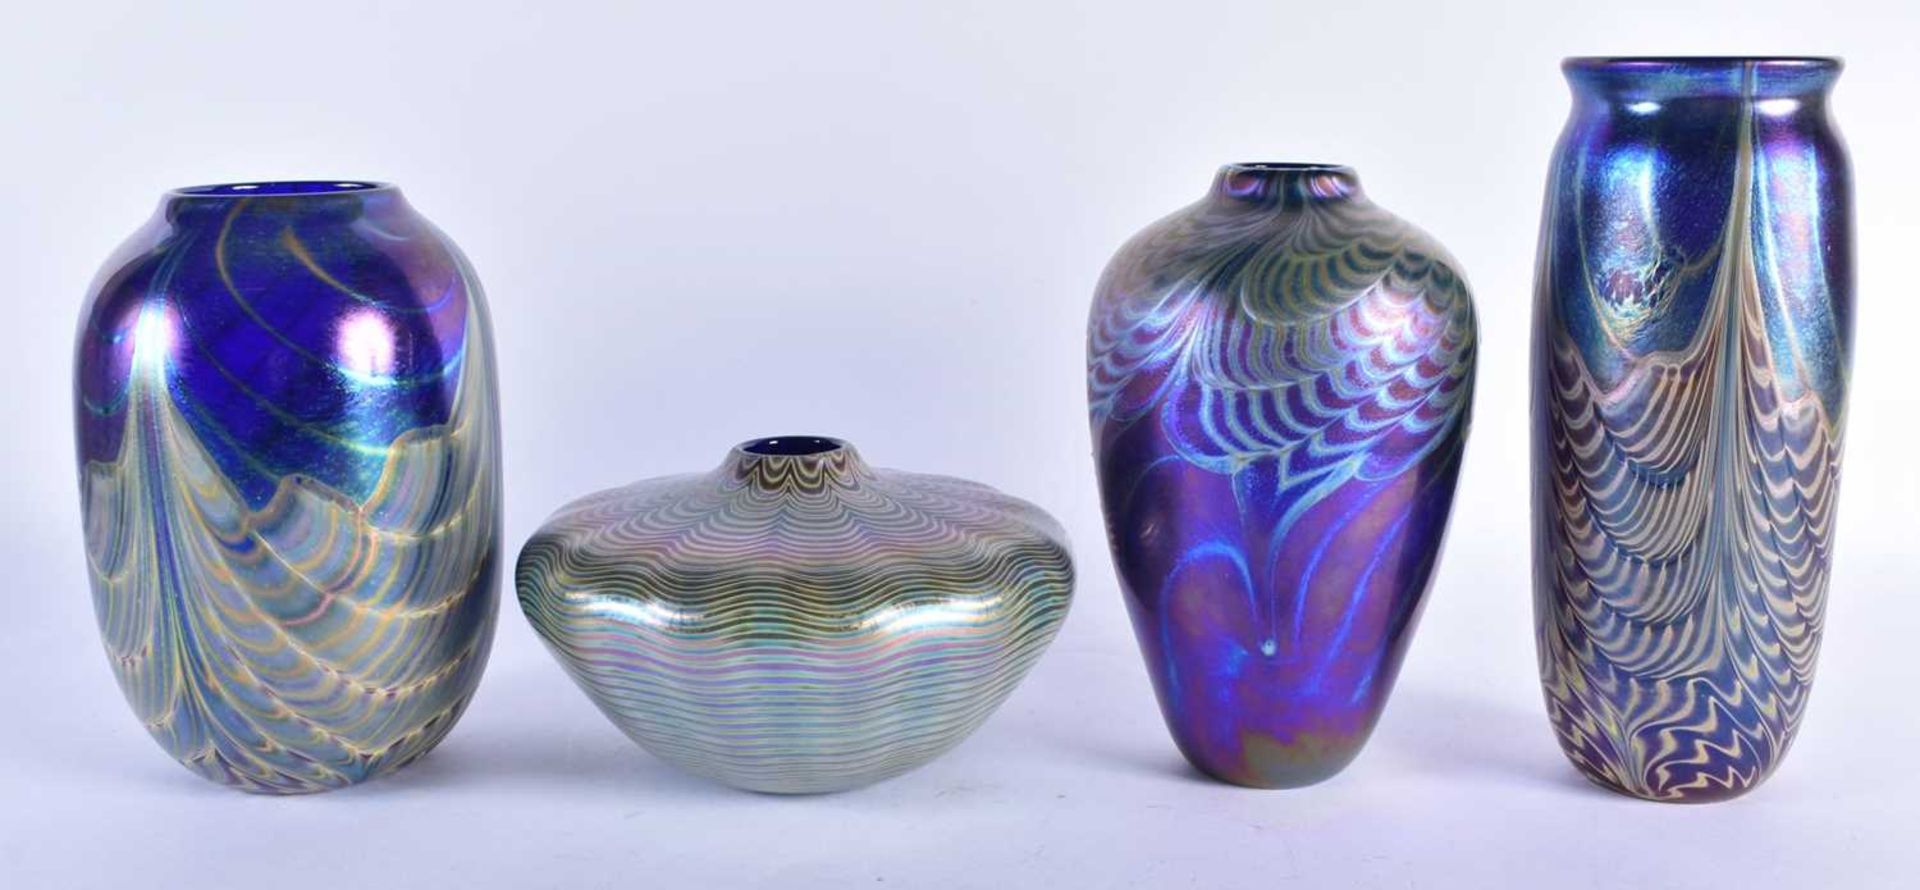 FOUR IRIDESCENT ART GLASS VASES. Largest 22 cm high. (4) - Image 2 of 4